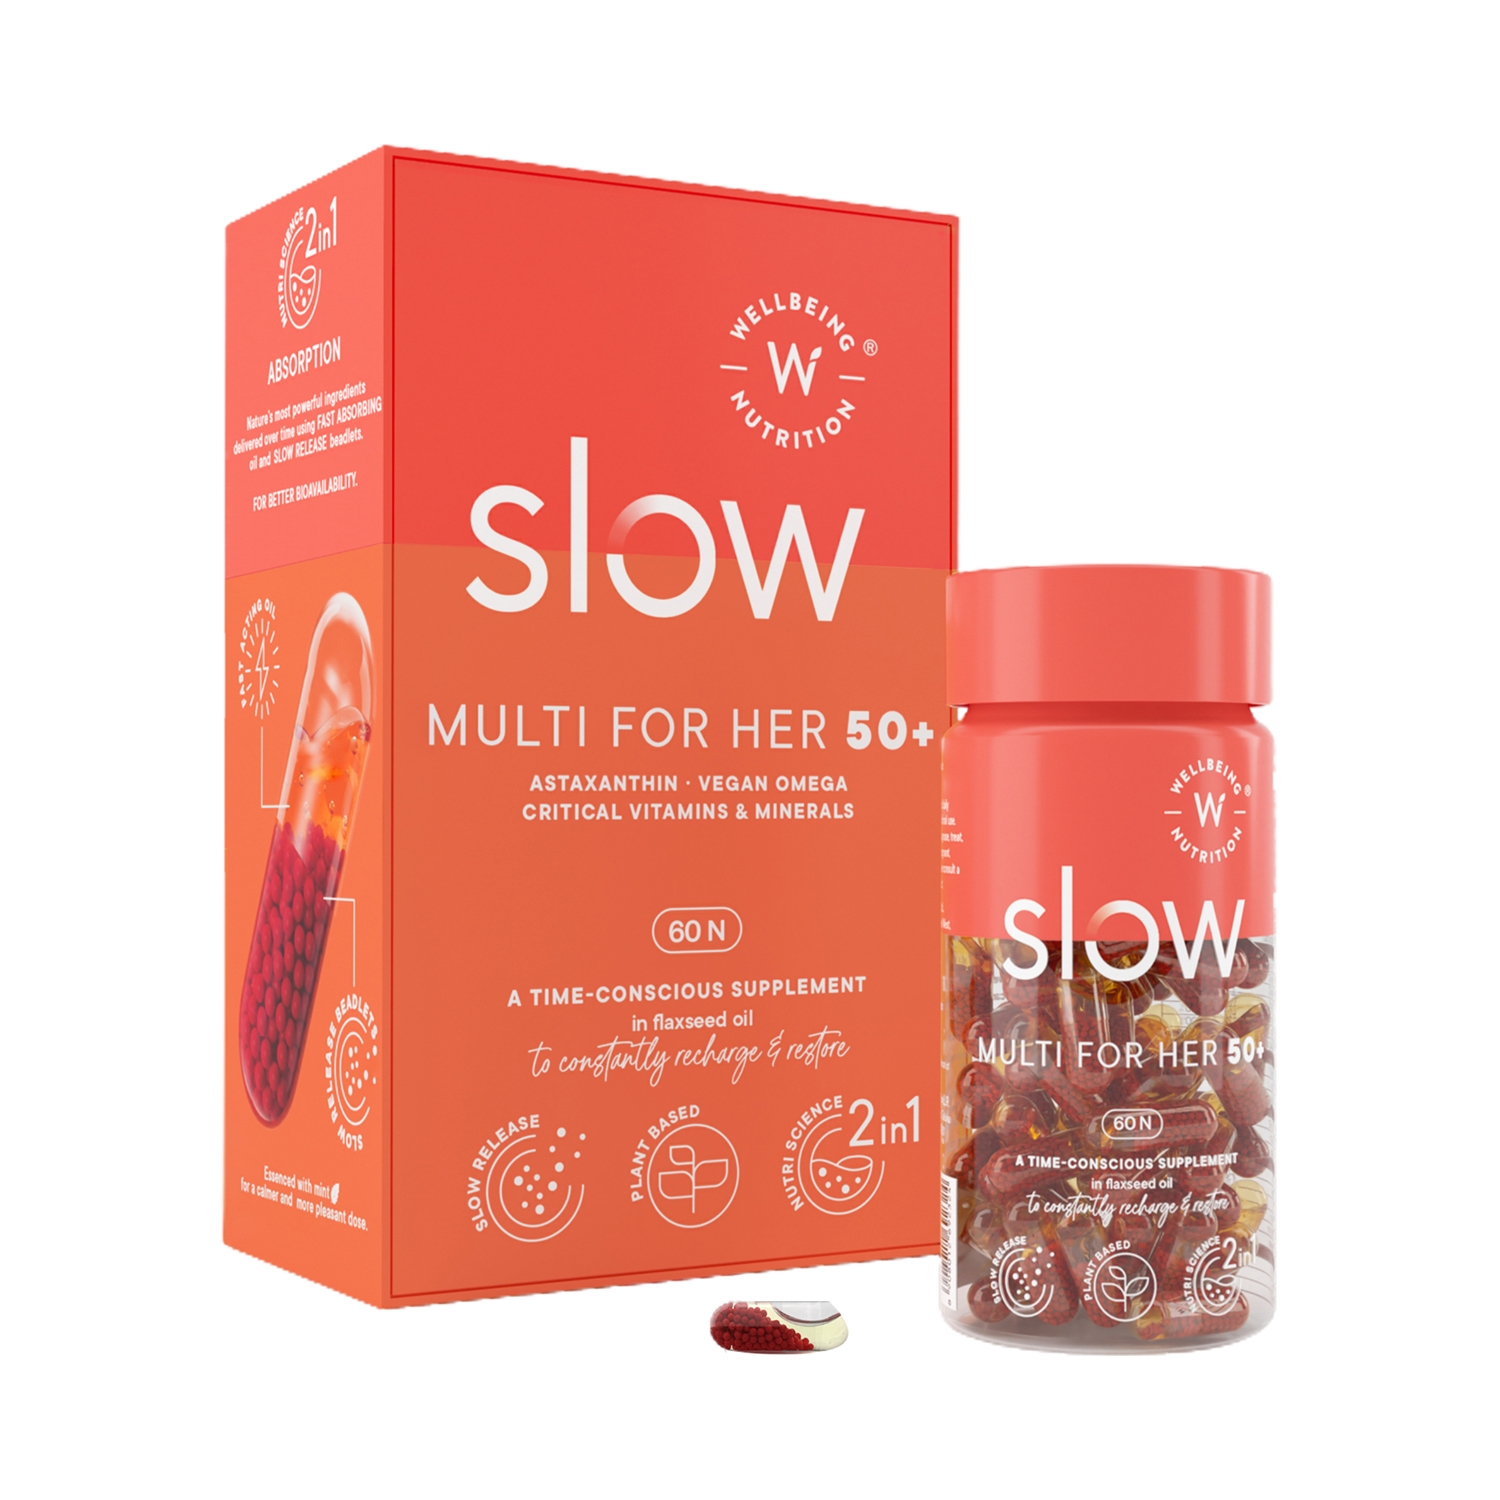 Wellbeing Nutrition | Wellbeing Nutrition Slow Multivitamin For Her 50+ for Bone, Heart Health & Cognition